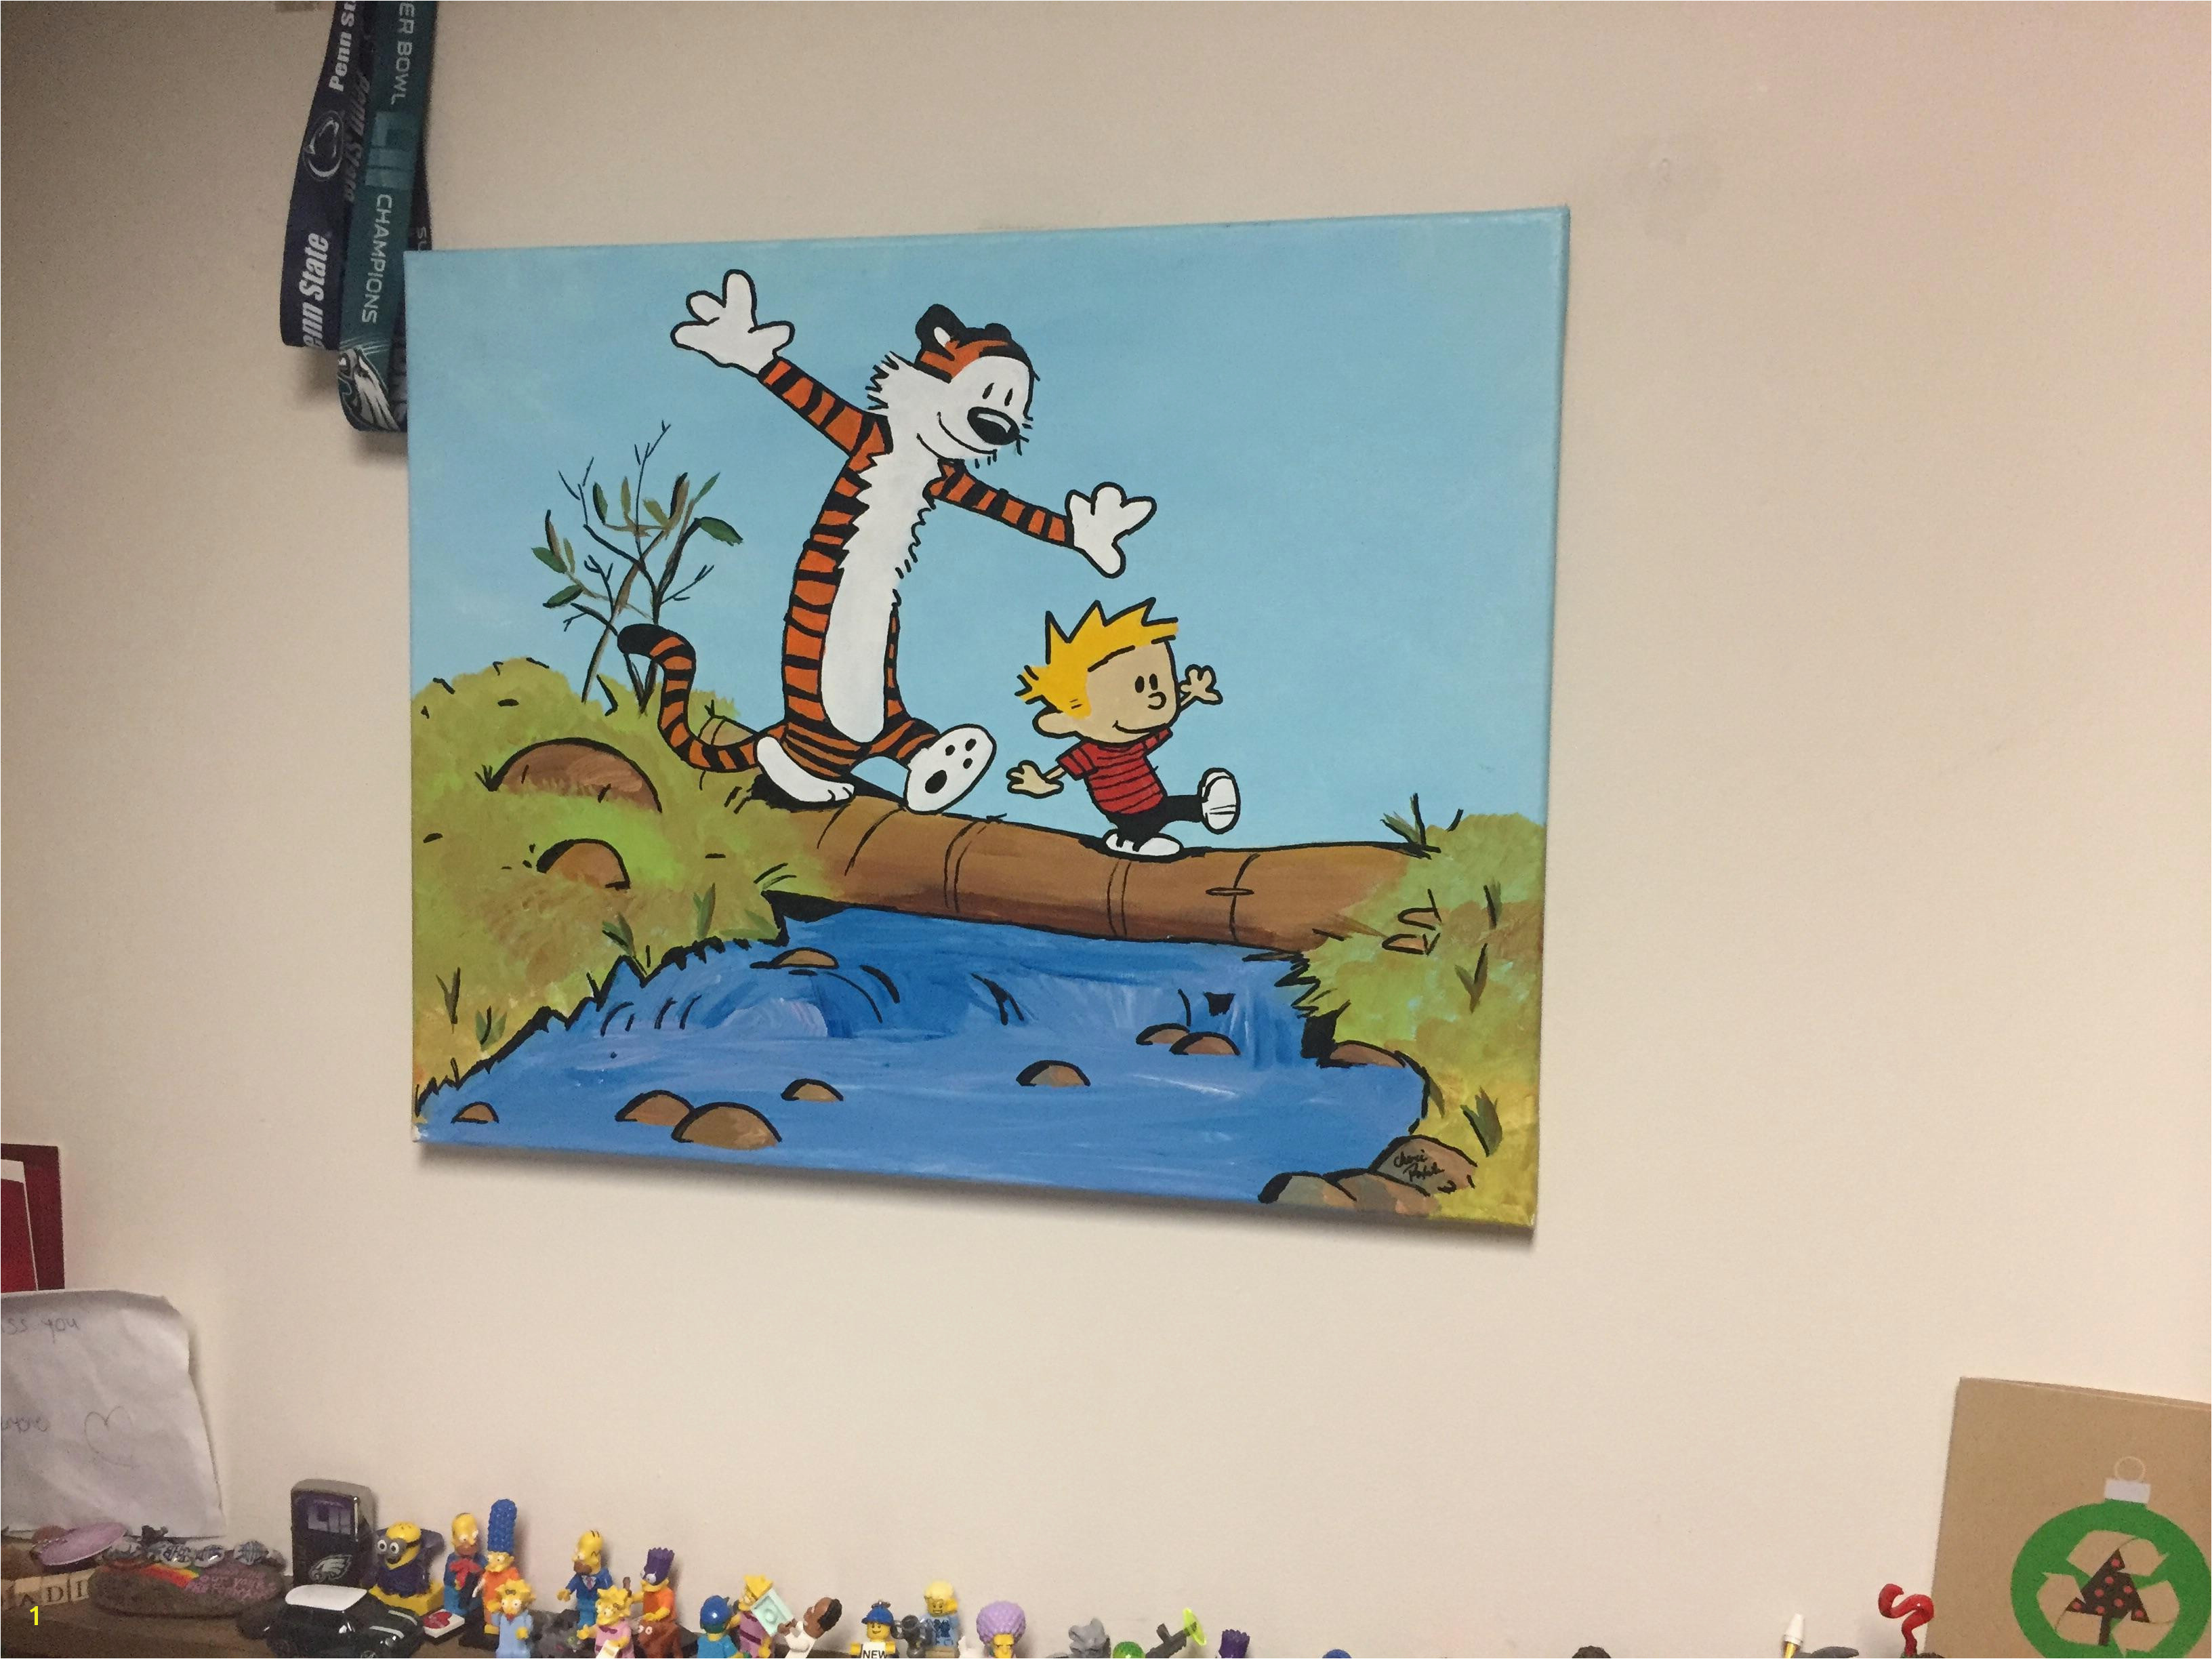 Calvin and Hobbes Mural A Good Friend Made This for Me then Shipped It All the Way Across